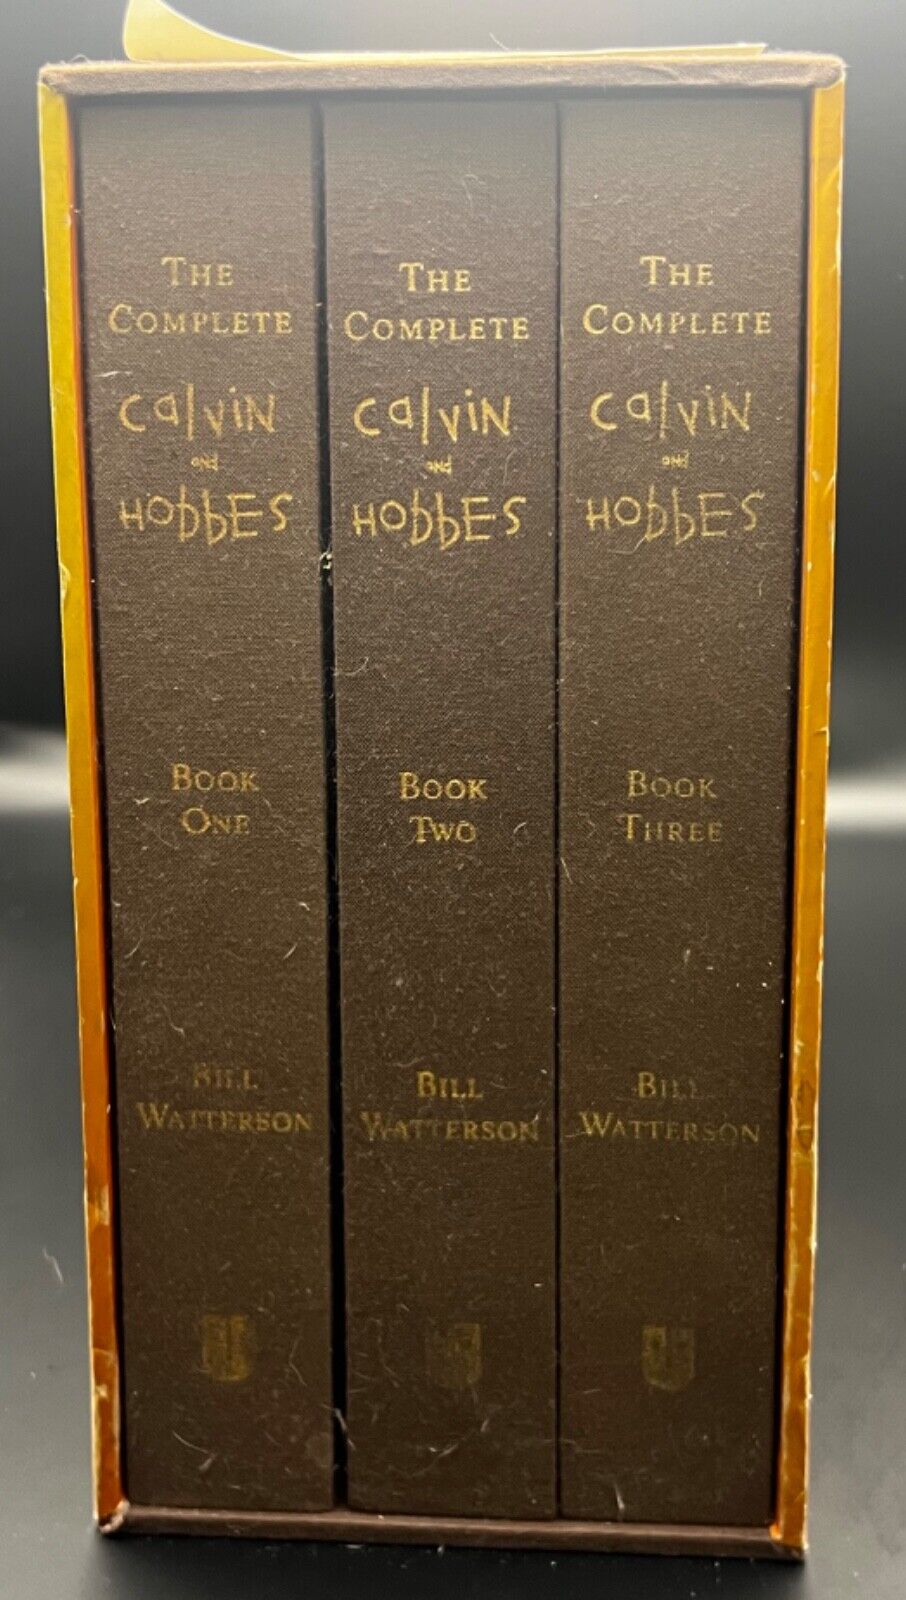 The Complete Calvin and Hobbes Hardcover Box Set Collection by Bill Watterson